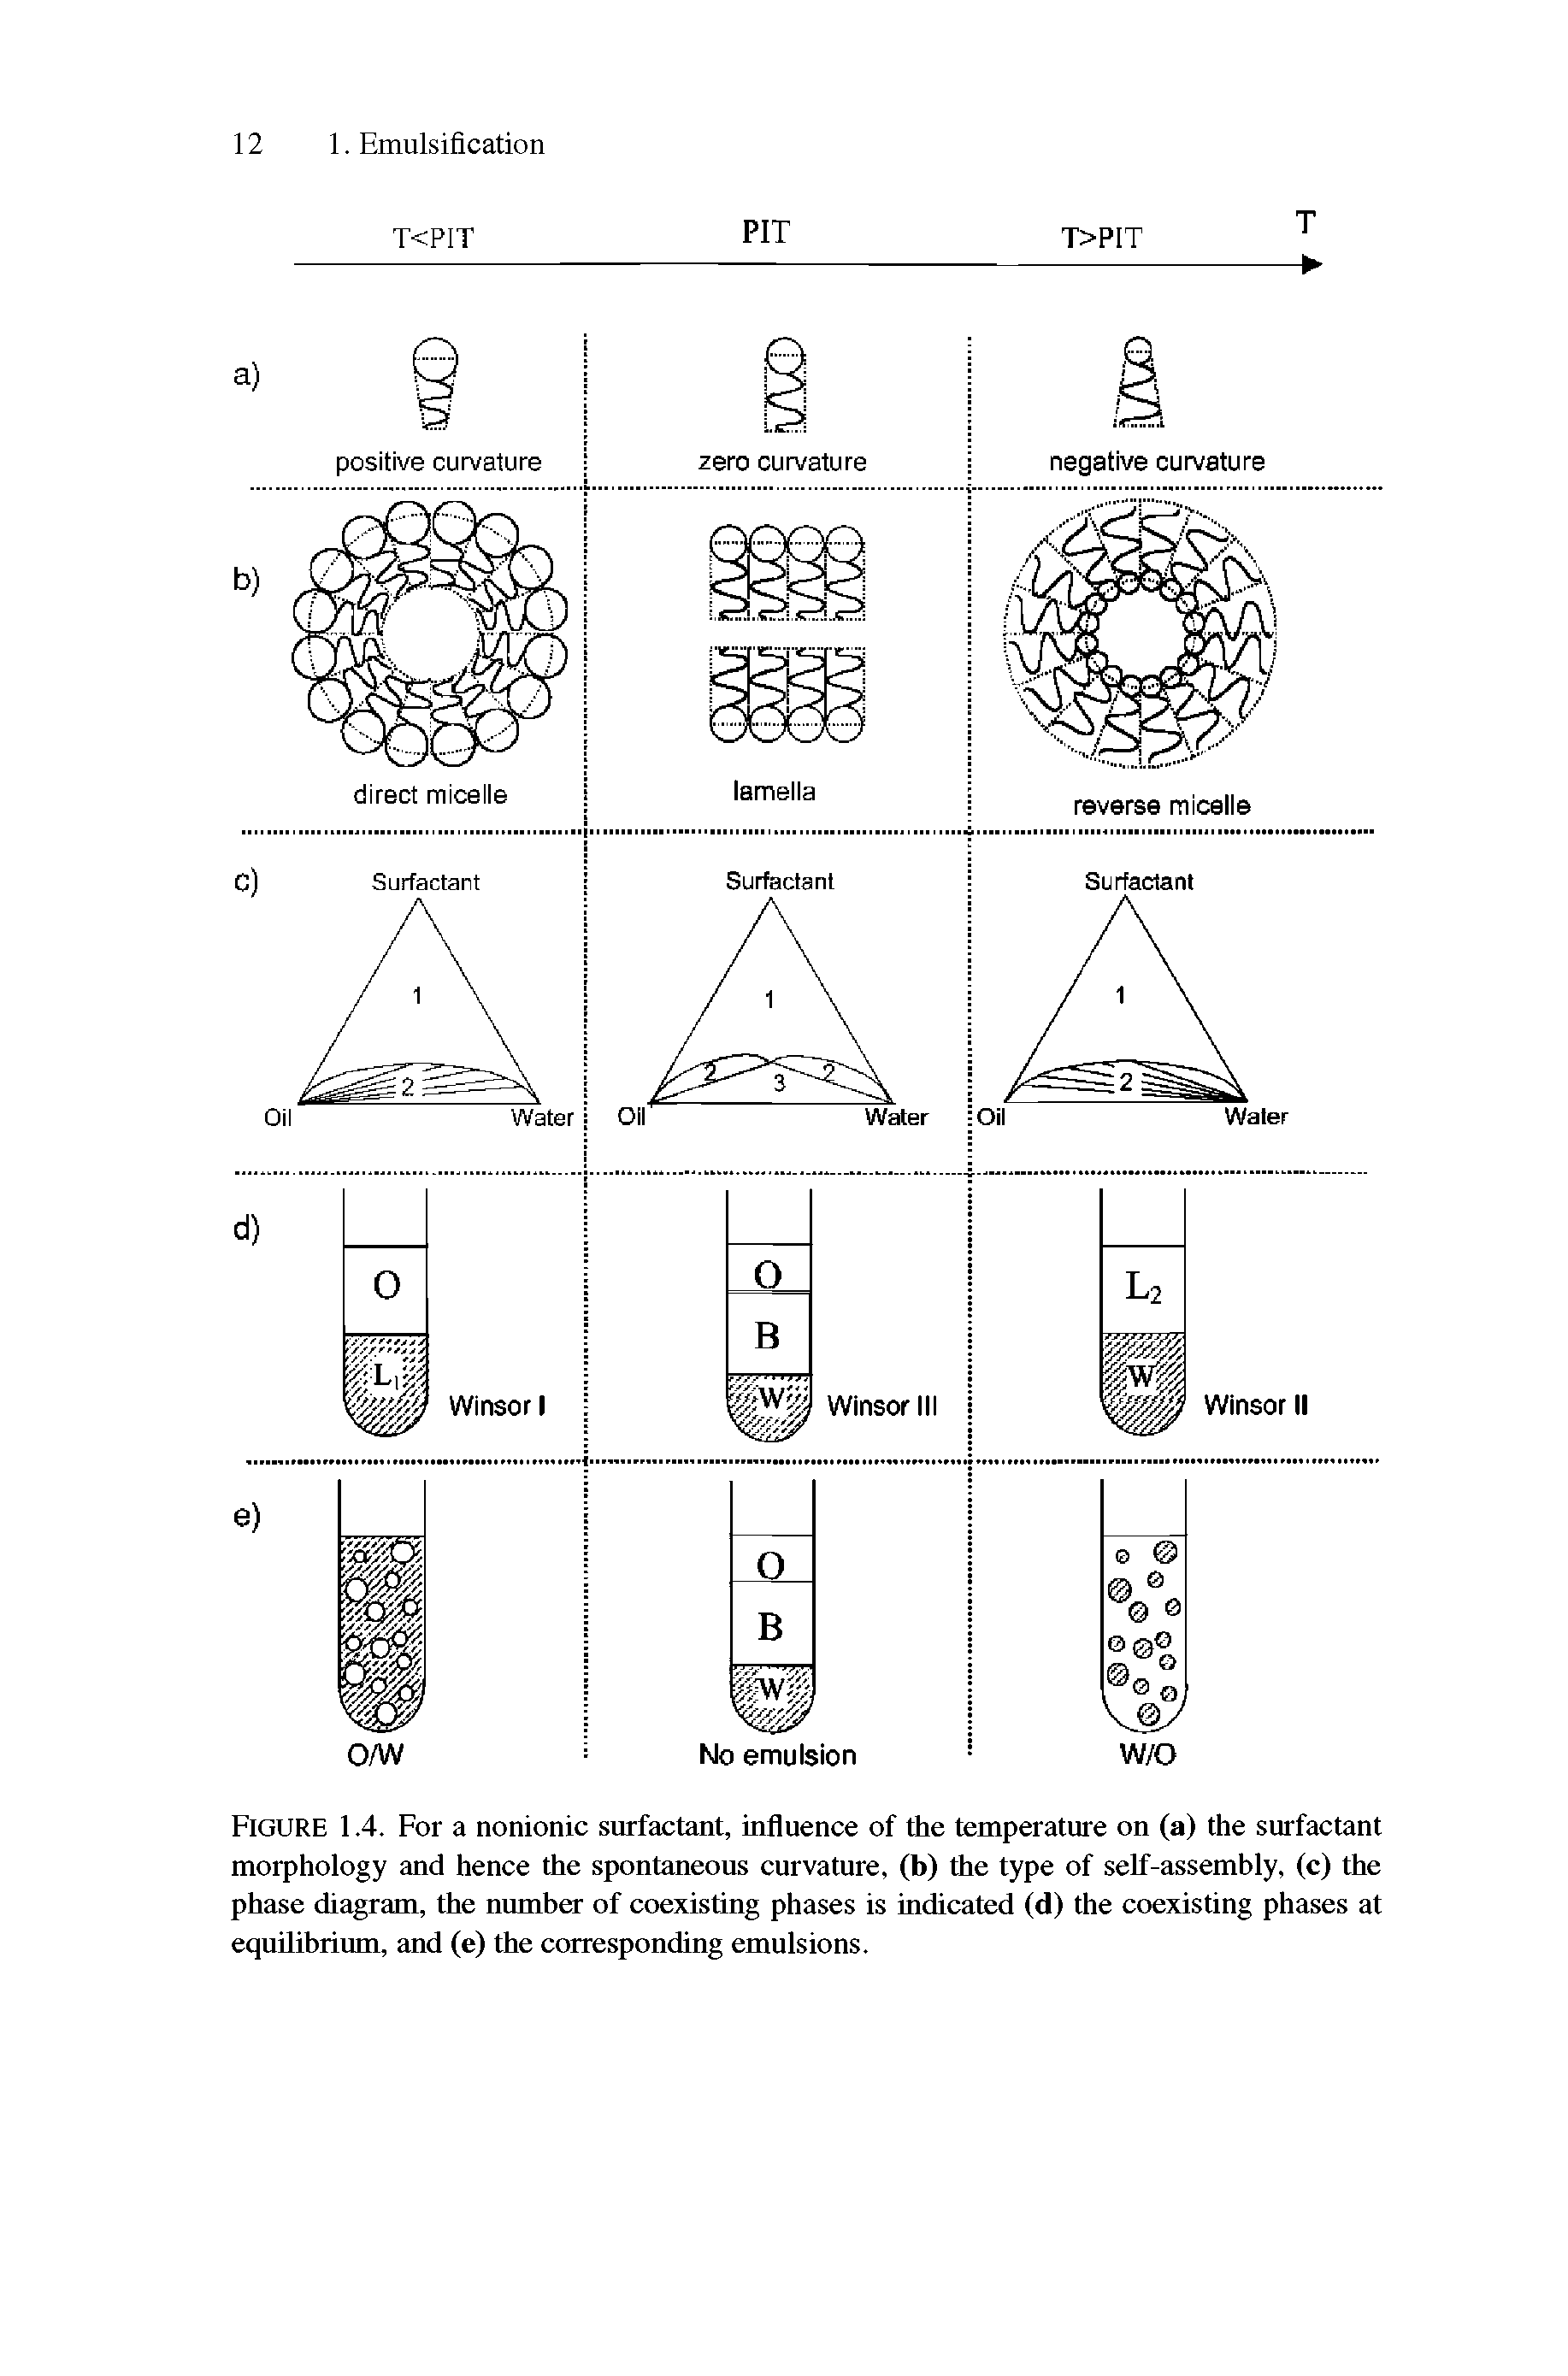 Figure 1.4. For a nonionic surfactant, influence of the temperature on (a) the surfactant morphology and hence the spontaneous curvature, (b) the type of self-assembly, (c) the phase diagram, the number of coexisting phases is indicated (d) the coexisting phases at equilibrium, and (e) the corresponding emulsions.